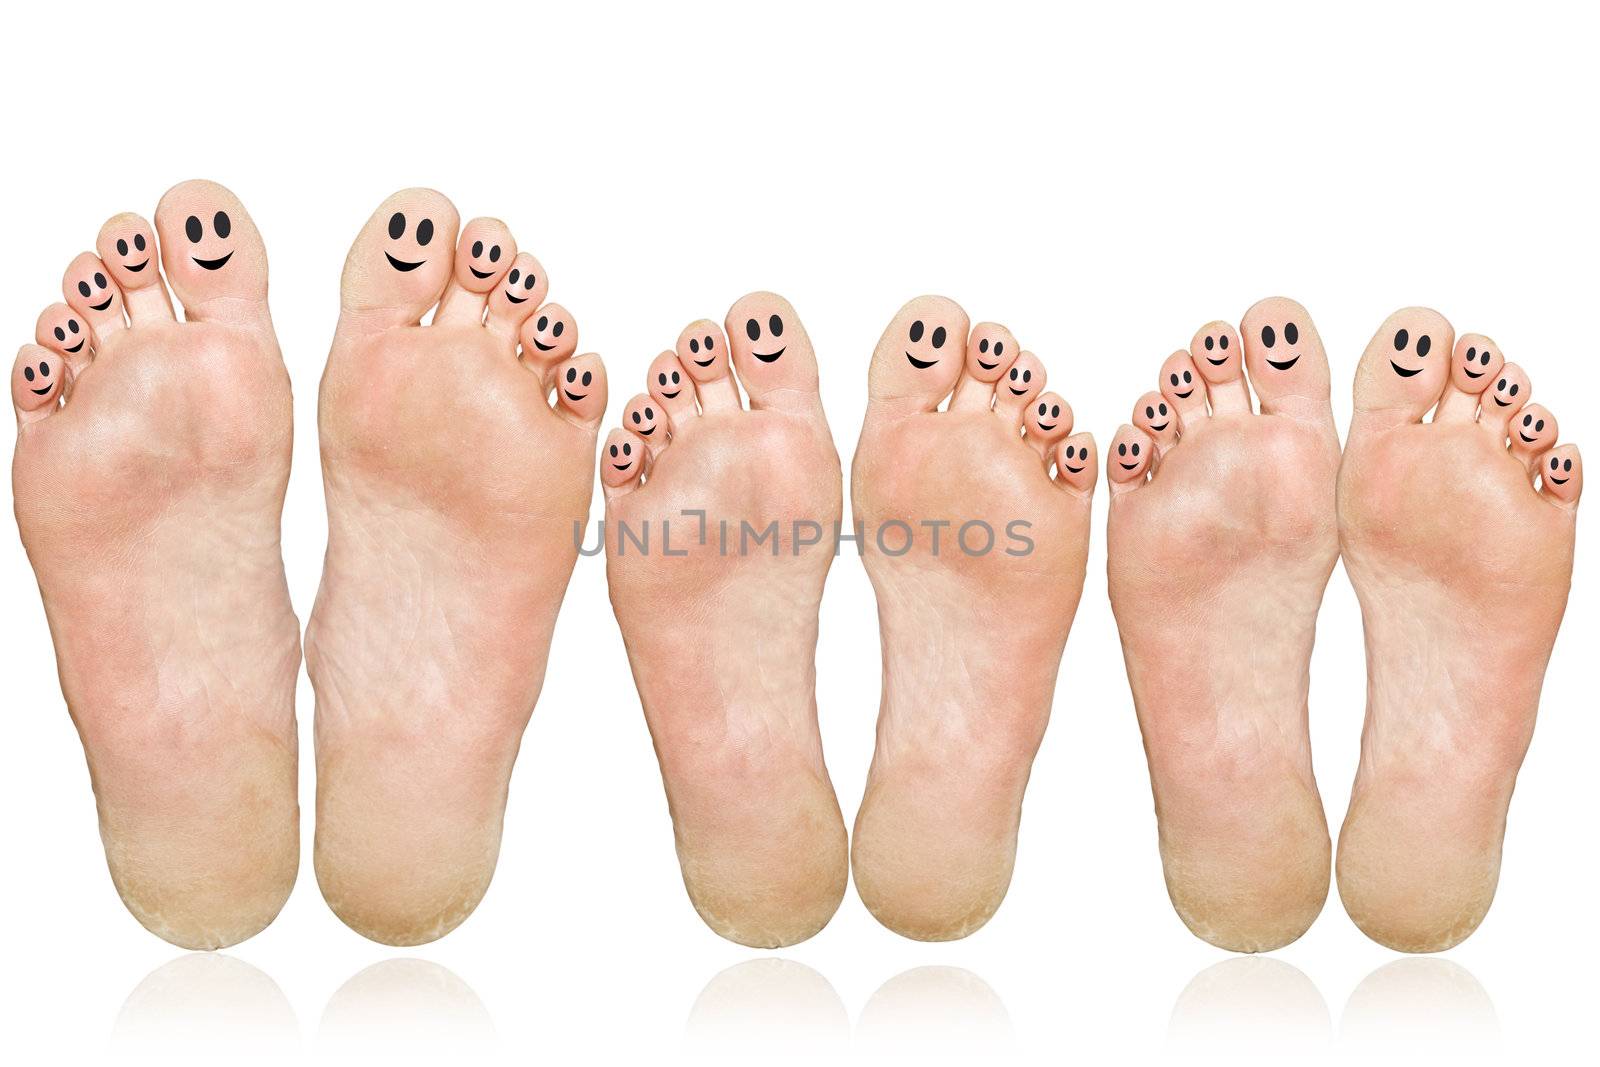 Smile. The large and small feet by petrkurgan